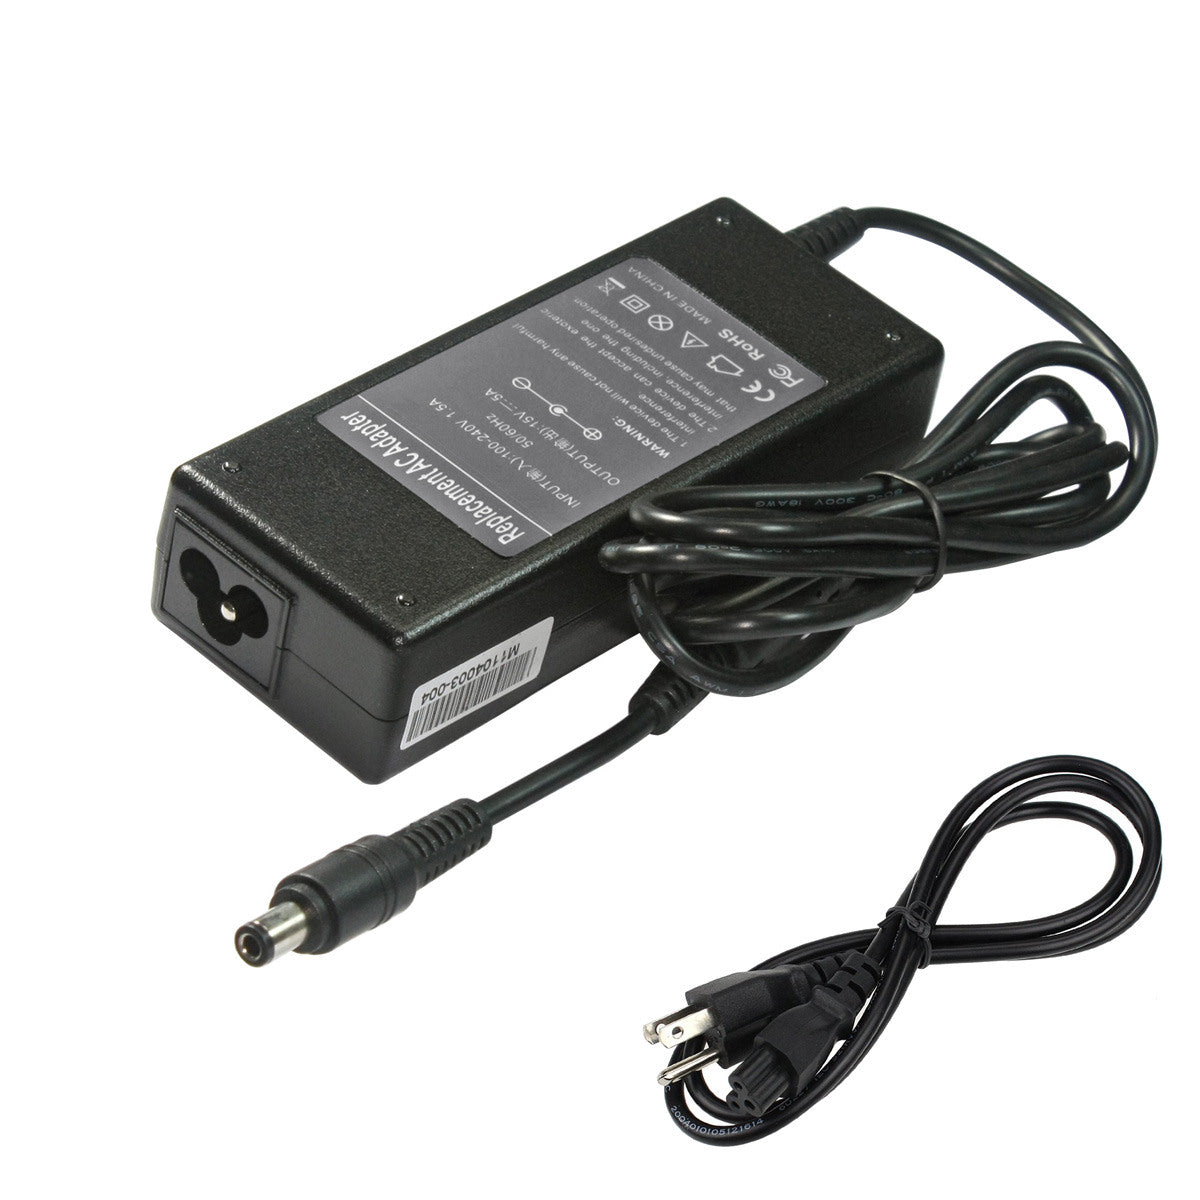 Compatible Replacement Toshiba Satellite PS225U Series Laptop Charger.